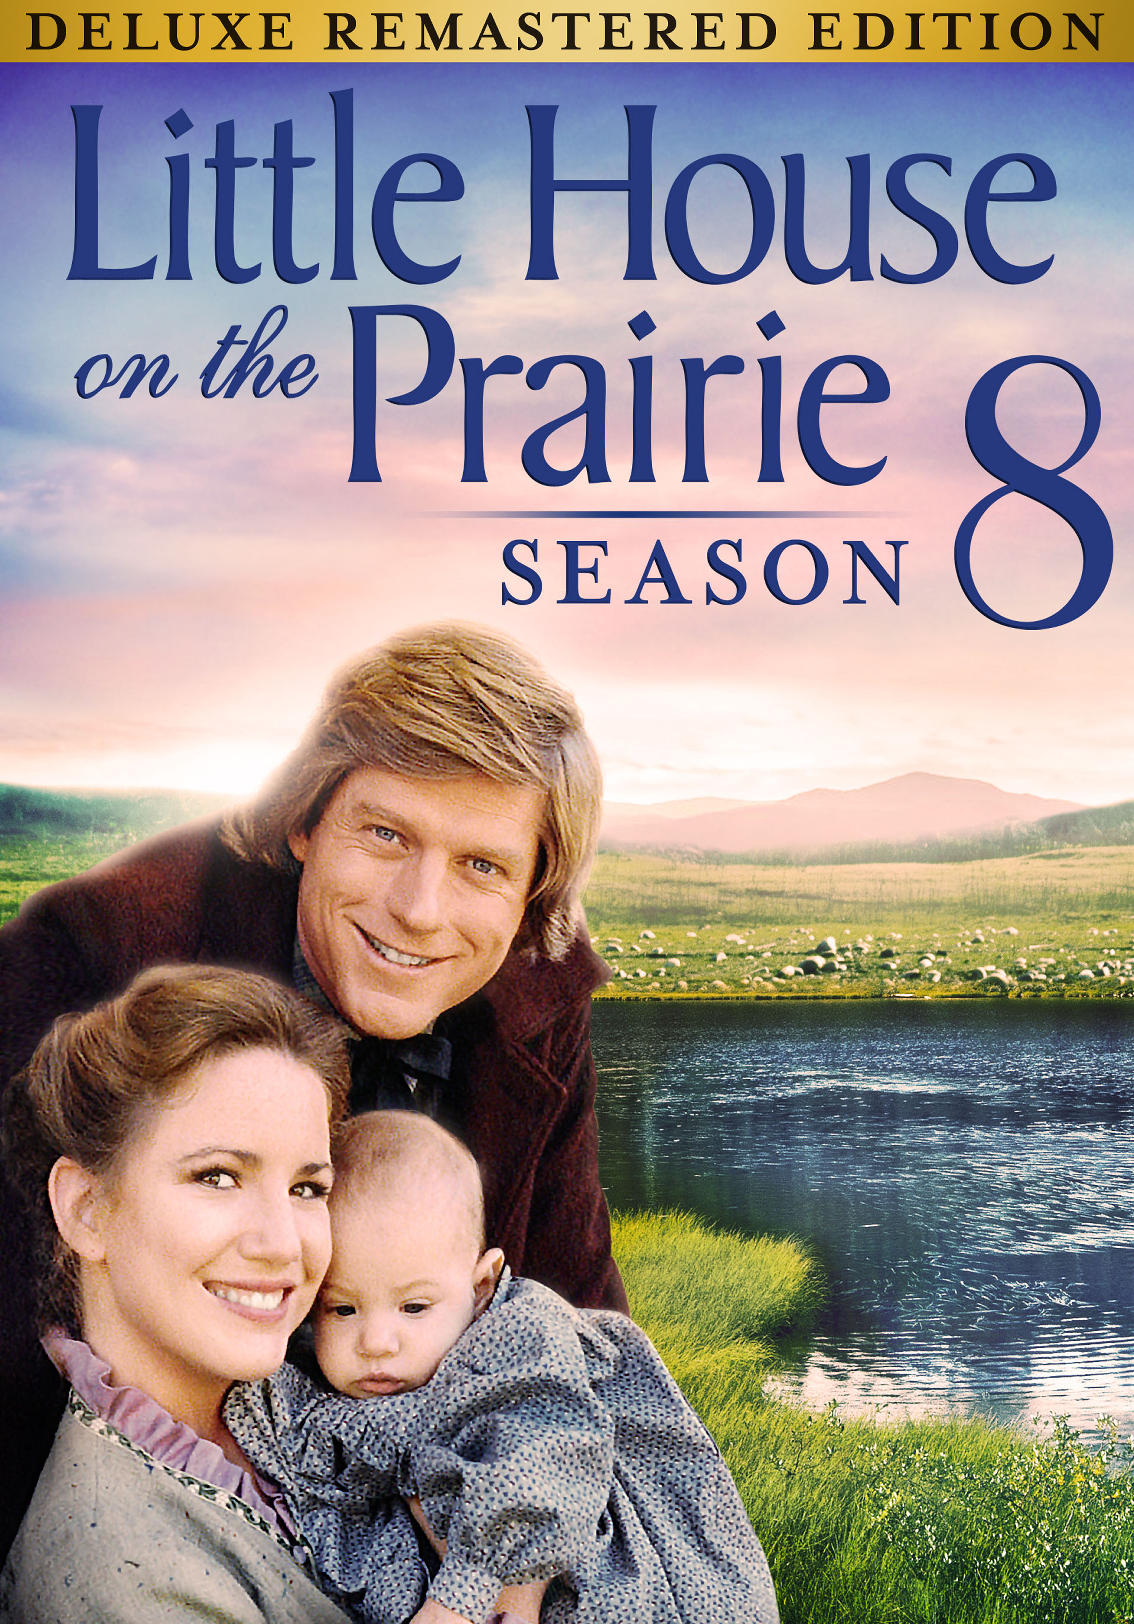 little house on the prairie complete series torrents